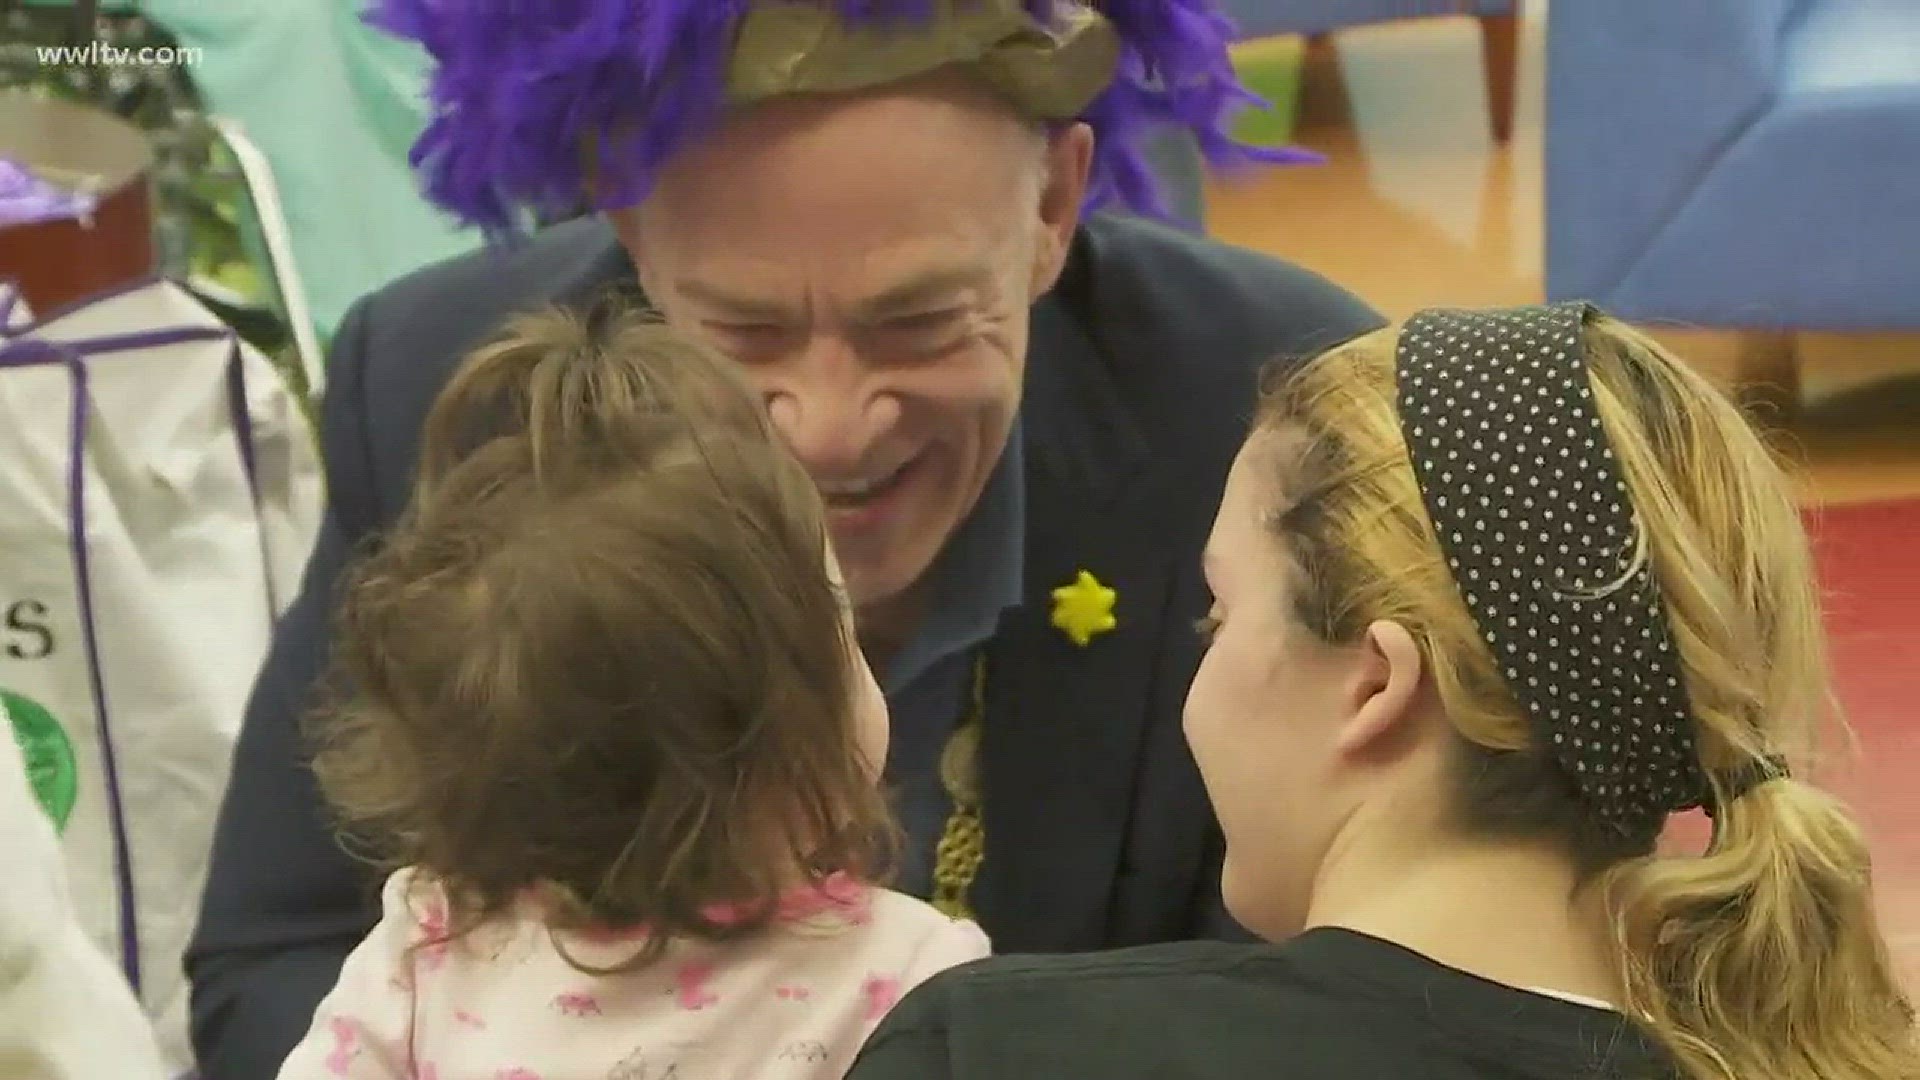 The King of Bacchus 2018, J.K. Simmons, brought a lot of smiles to children's faces as he visited them on Saturday.